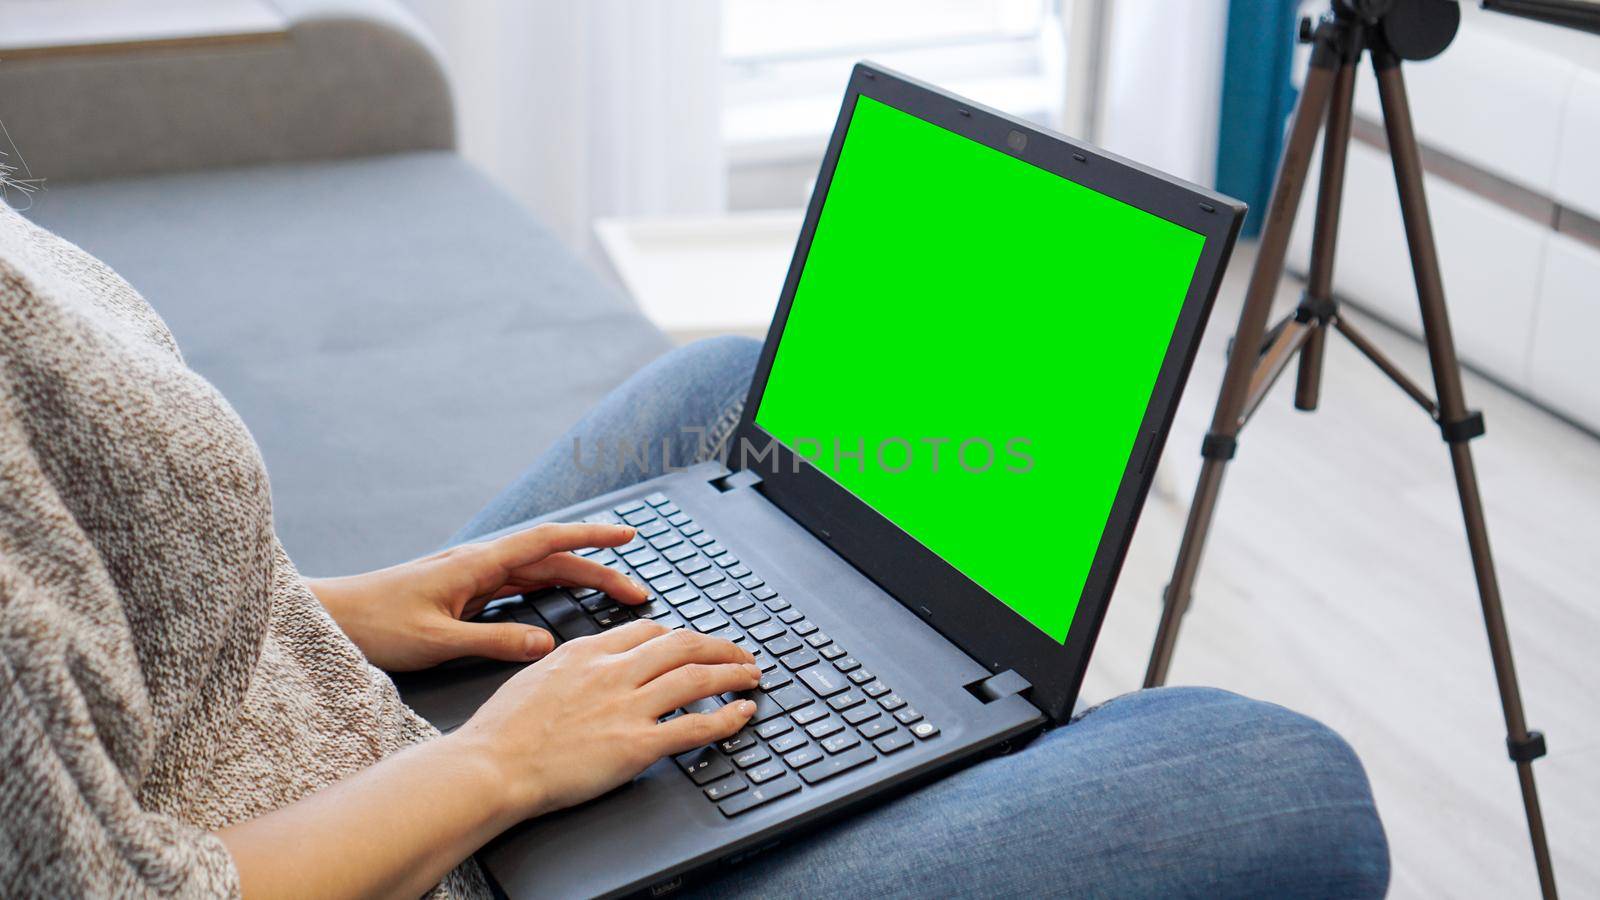 Woman blogger working on laptop. View of camera on tripod and laptop with green screen chromakey - close up view